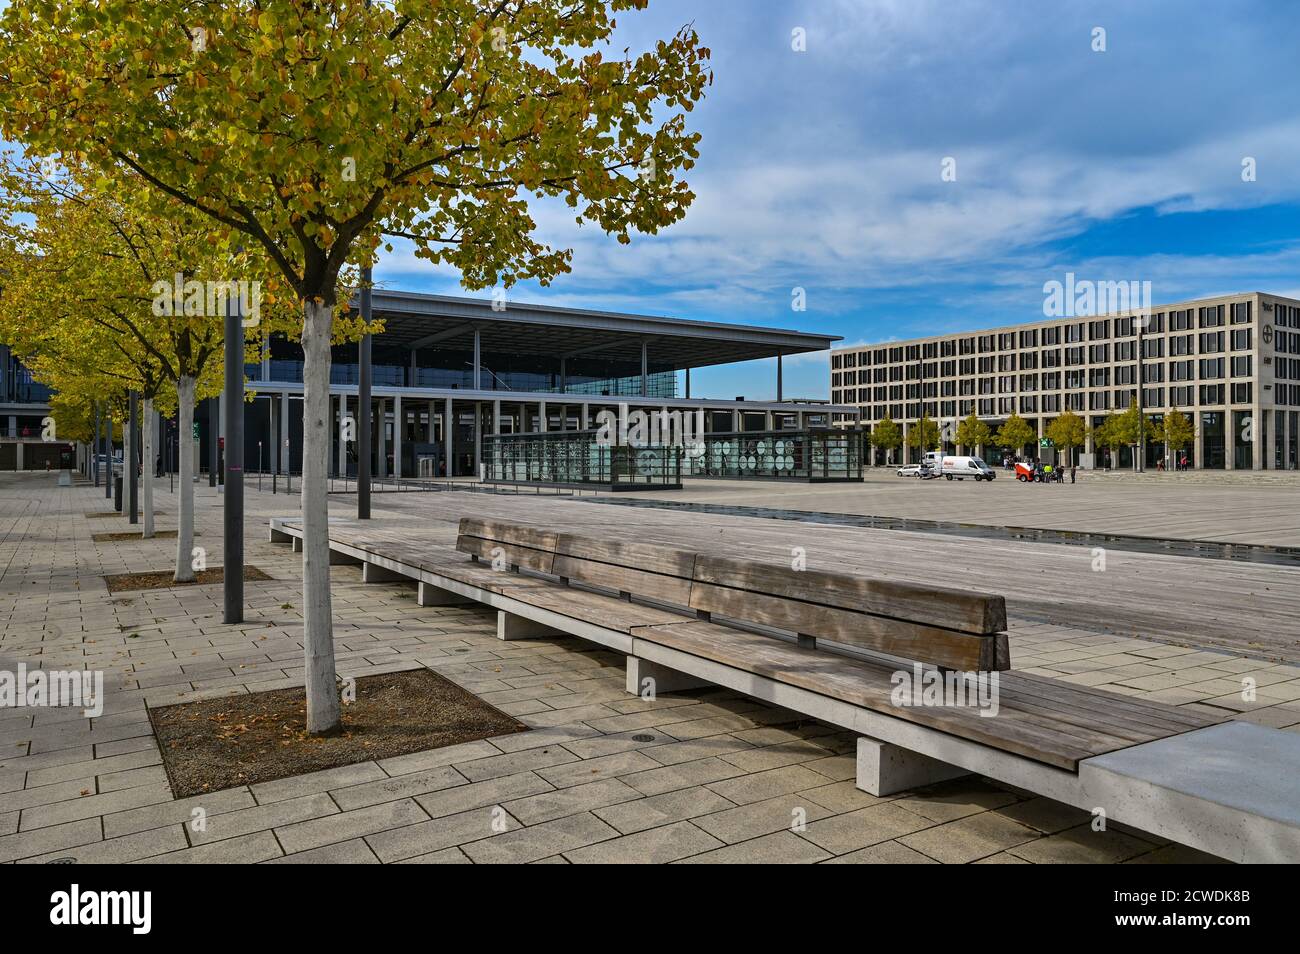 29 September 2020, Brandenburg, Schönefeld: View of the main terminal (l) and an outbuilding of the airport Berlin Brandenburg 'Willy Brandt' (BER). The capital airport BER at the border to Berlin is planned to open on 31.10.2020. Photo: Patrick Pleul/dpa-Zentralbild/dpa Stock Photo